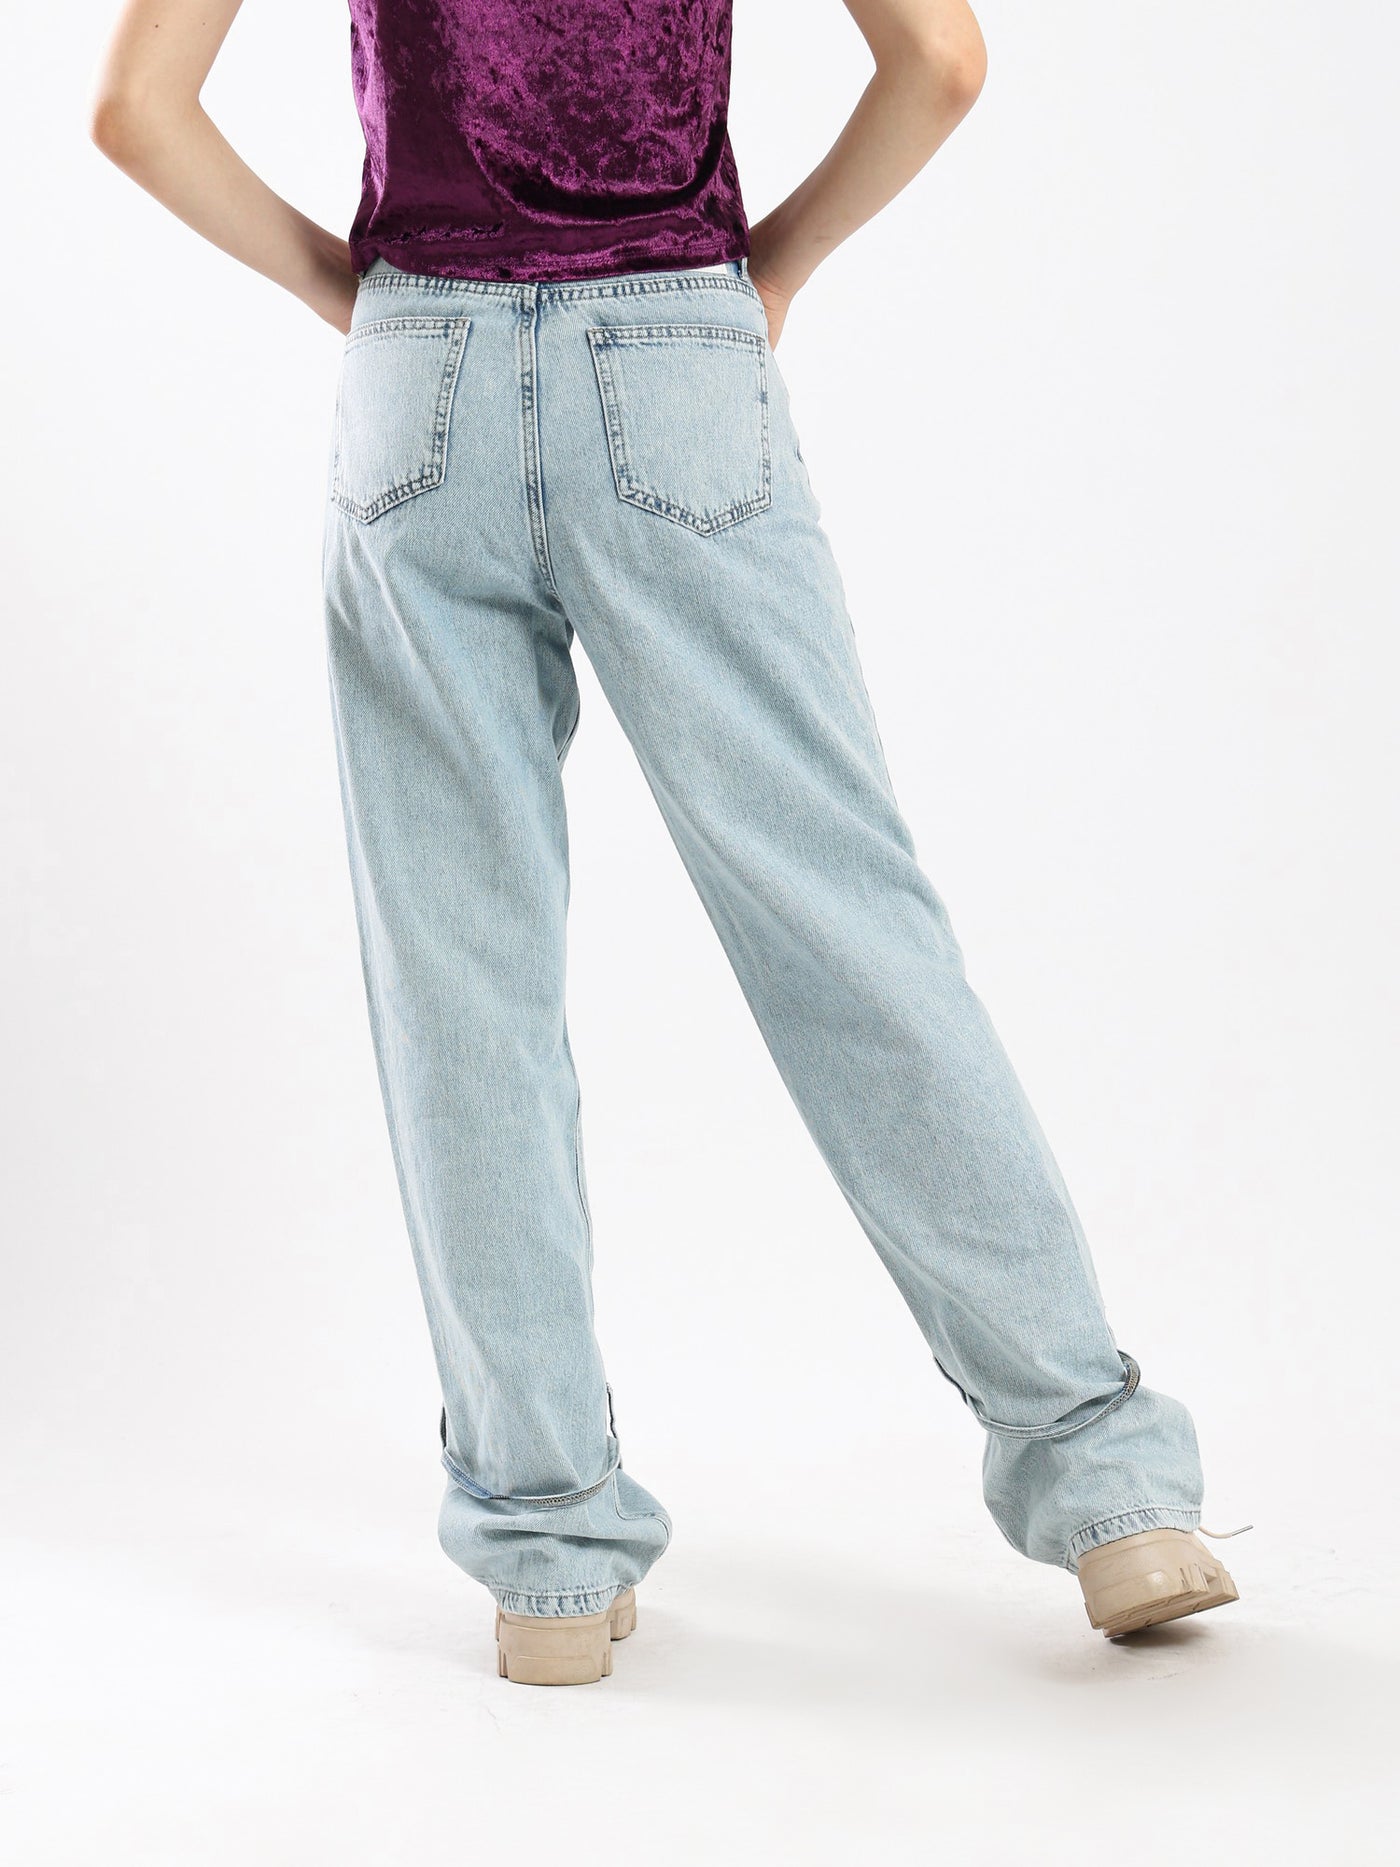 Denim Pants - With Pockets - Fly Zip Closure